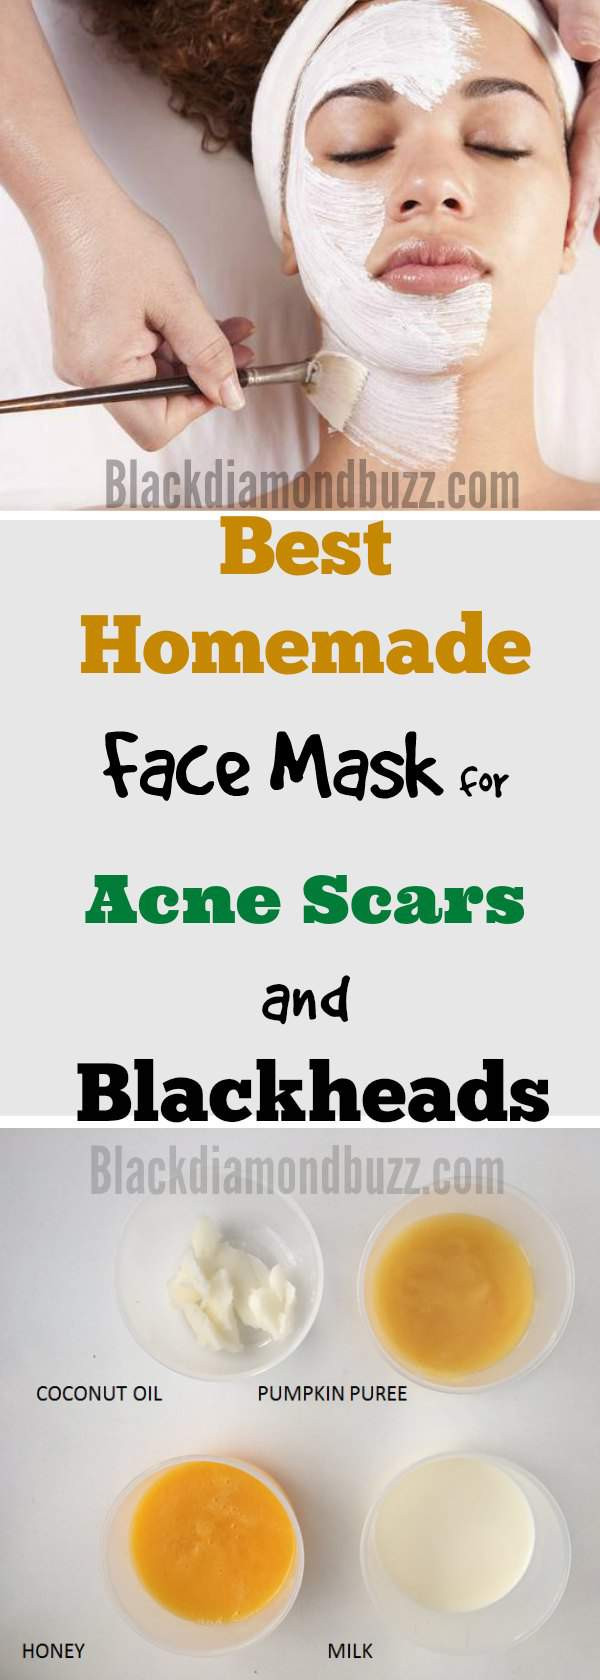 DIY Pimple Mask
 Diy Honey Mask For Acne Scars Do It Your Self